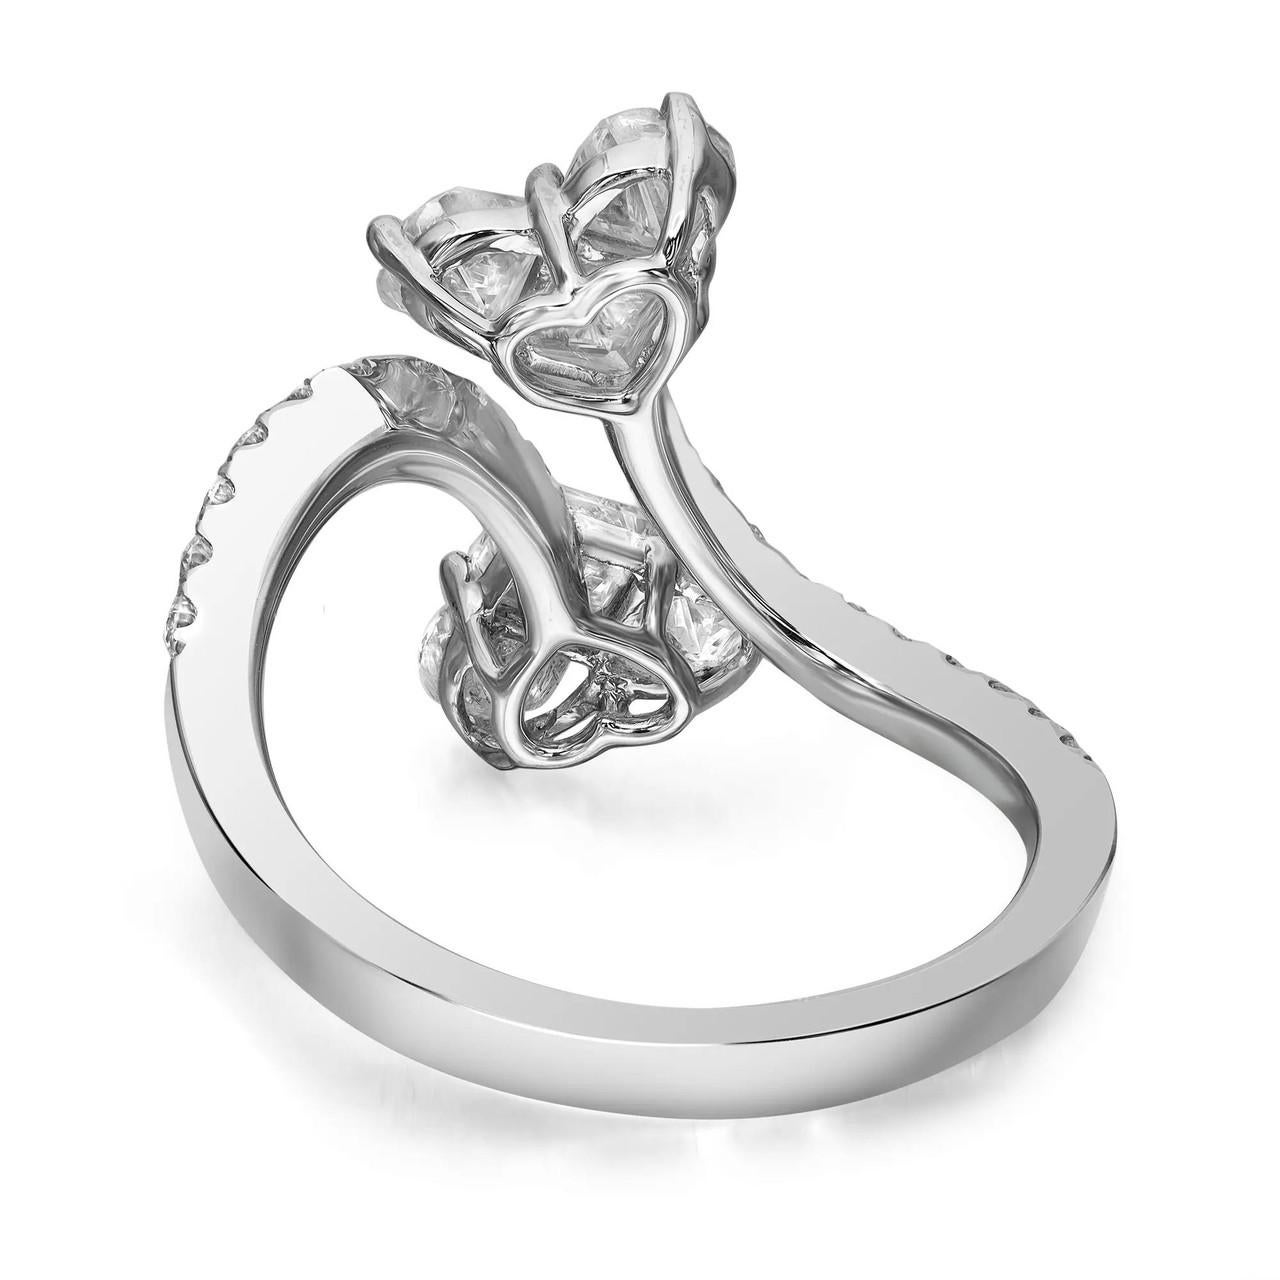 For Sale:  1.67 Carat Heart-Shaped Diamond Ring in 18k White Gold 3